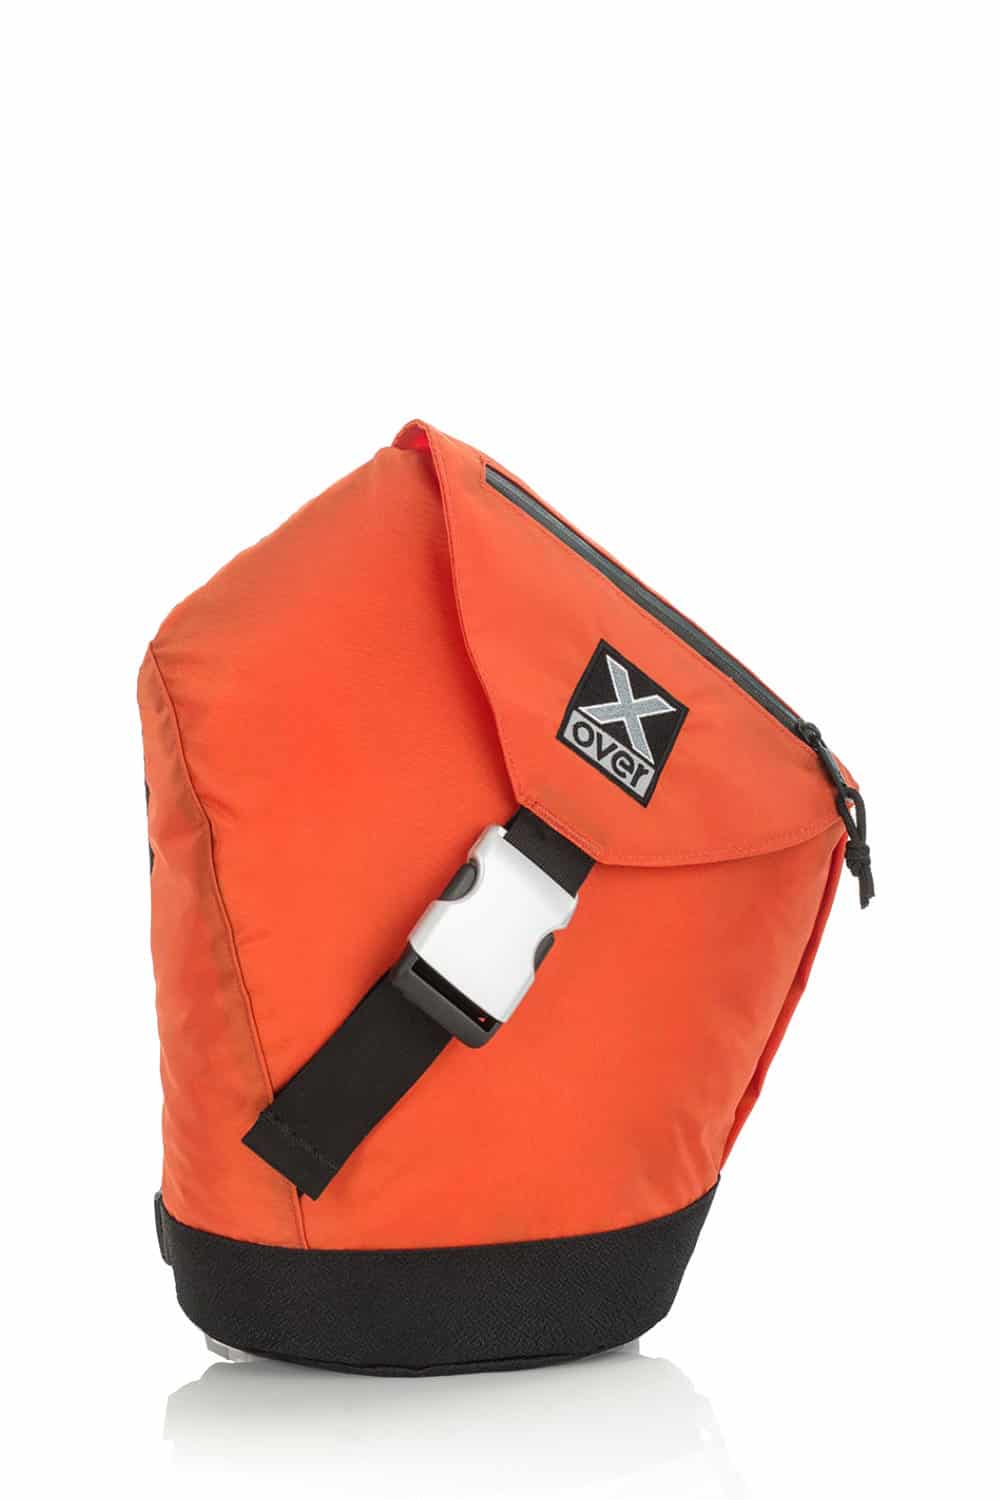 X-over Agility bag in color sunset